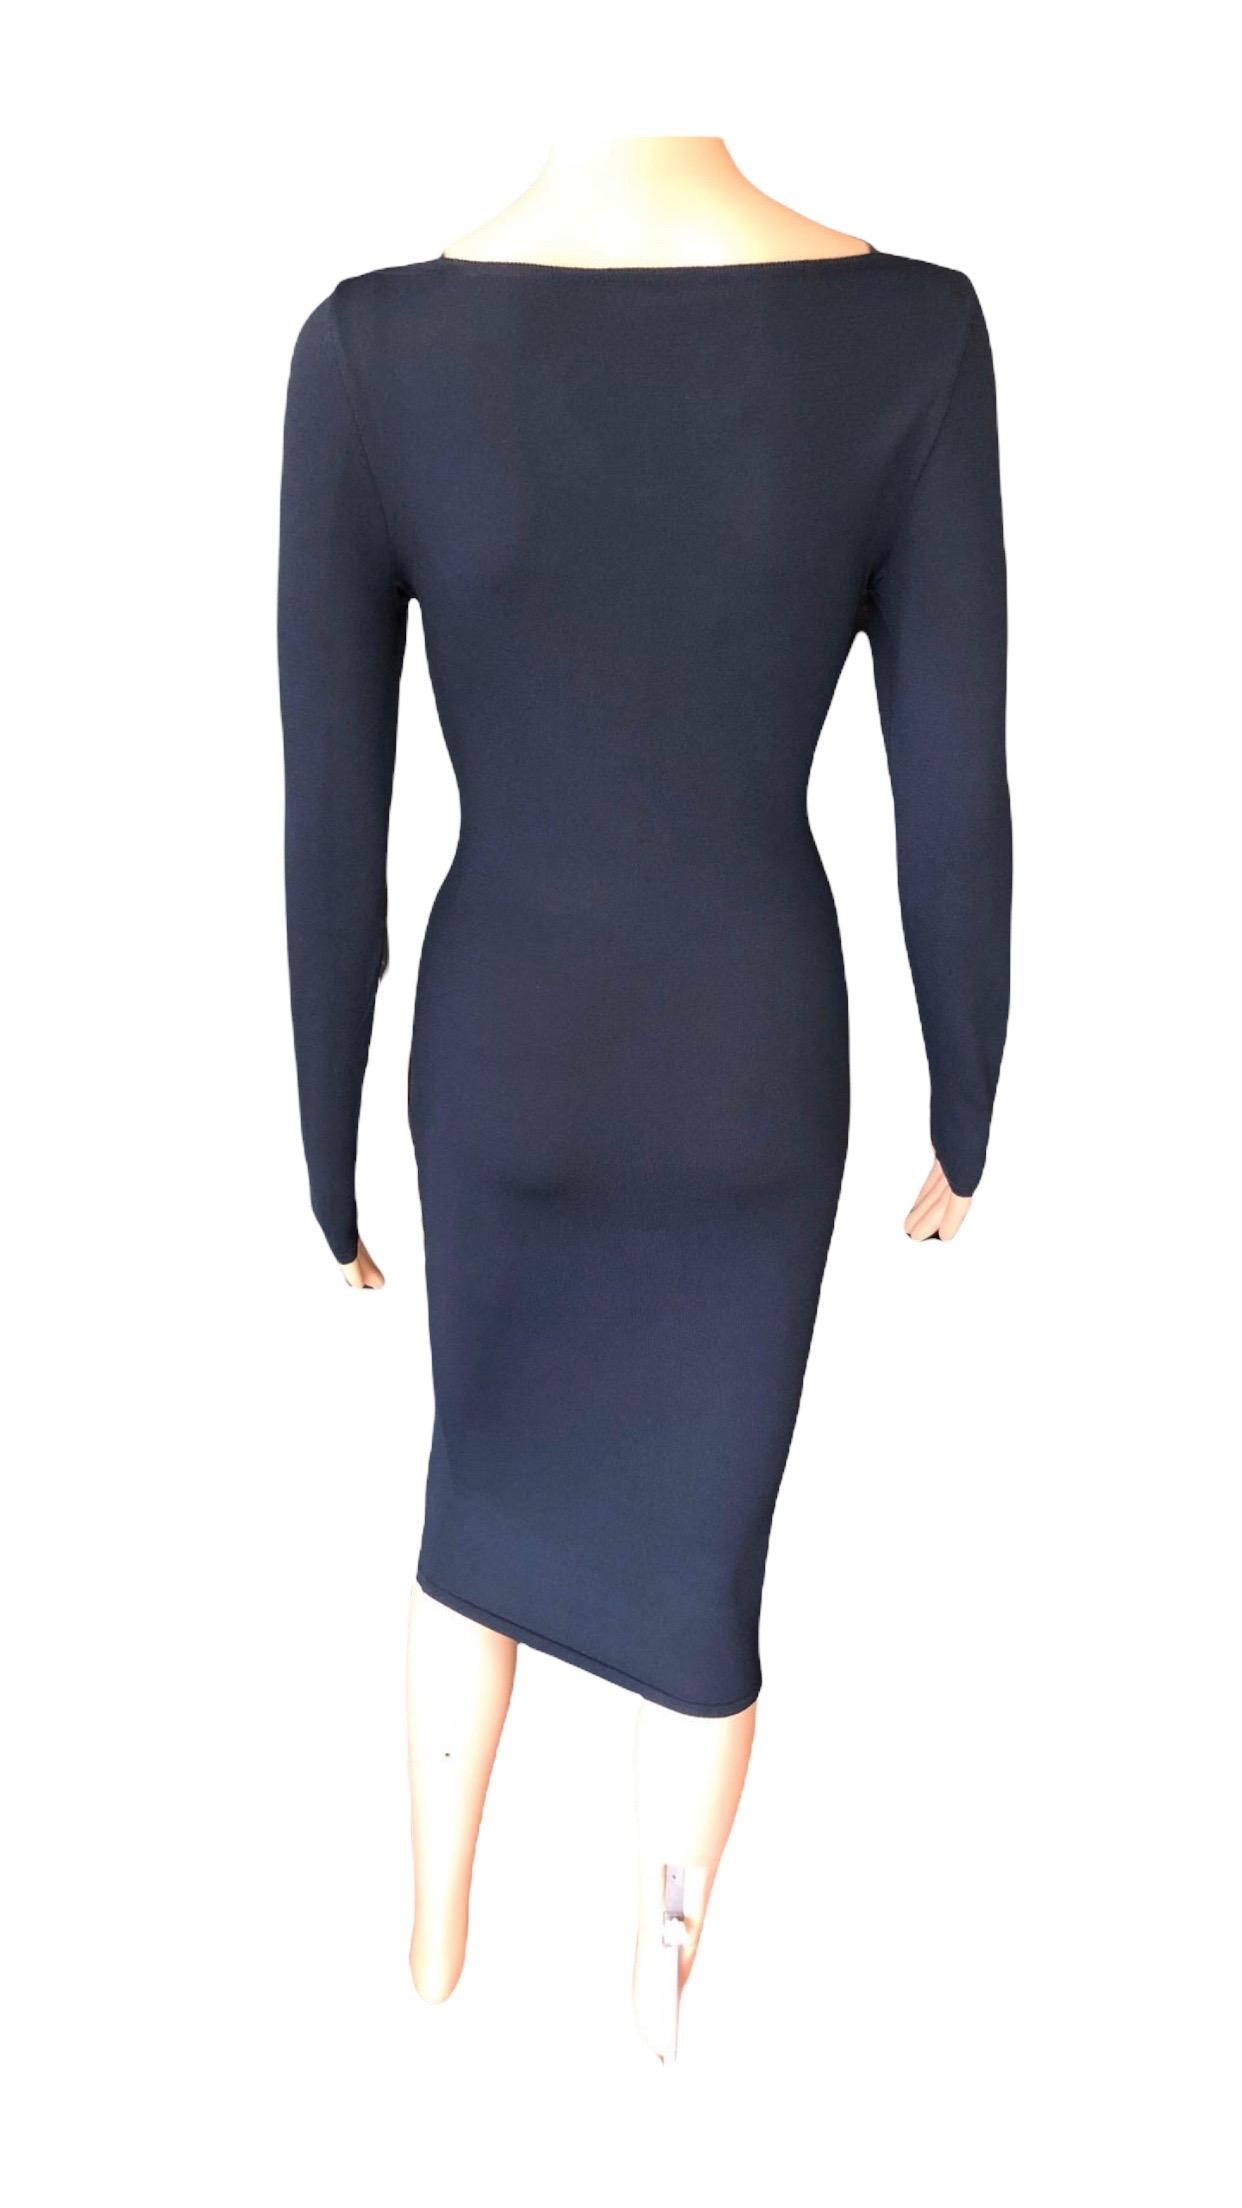 Tom Ford for Gucci S/S 1998 Vintage Bodycon Knit Midi Dress 6